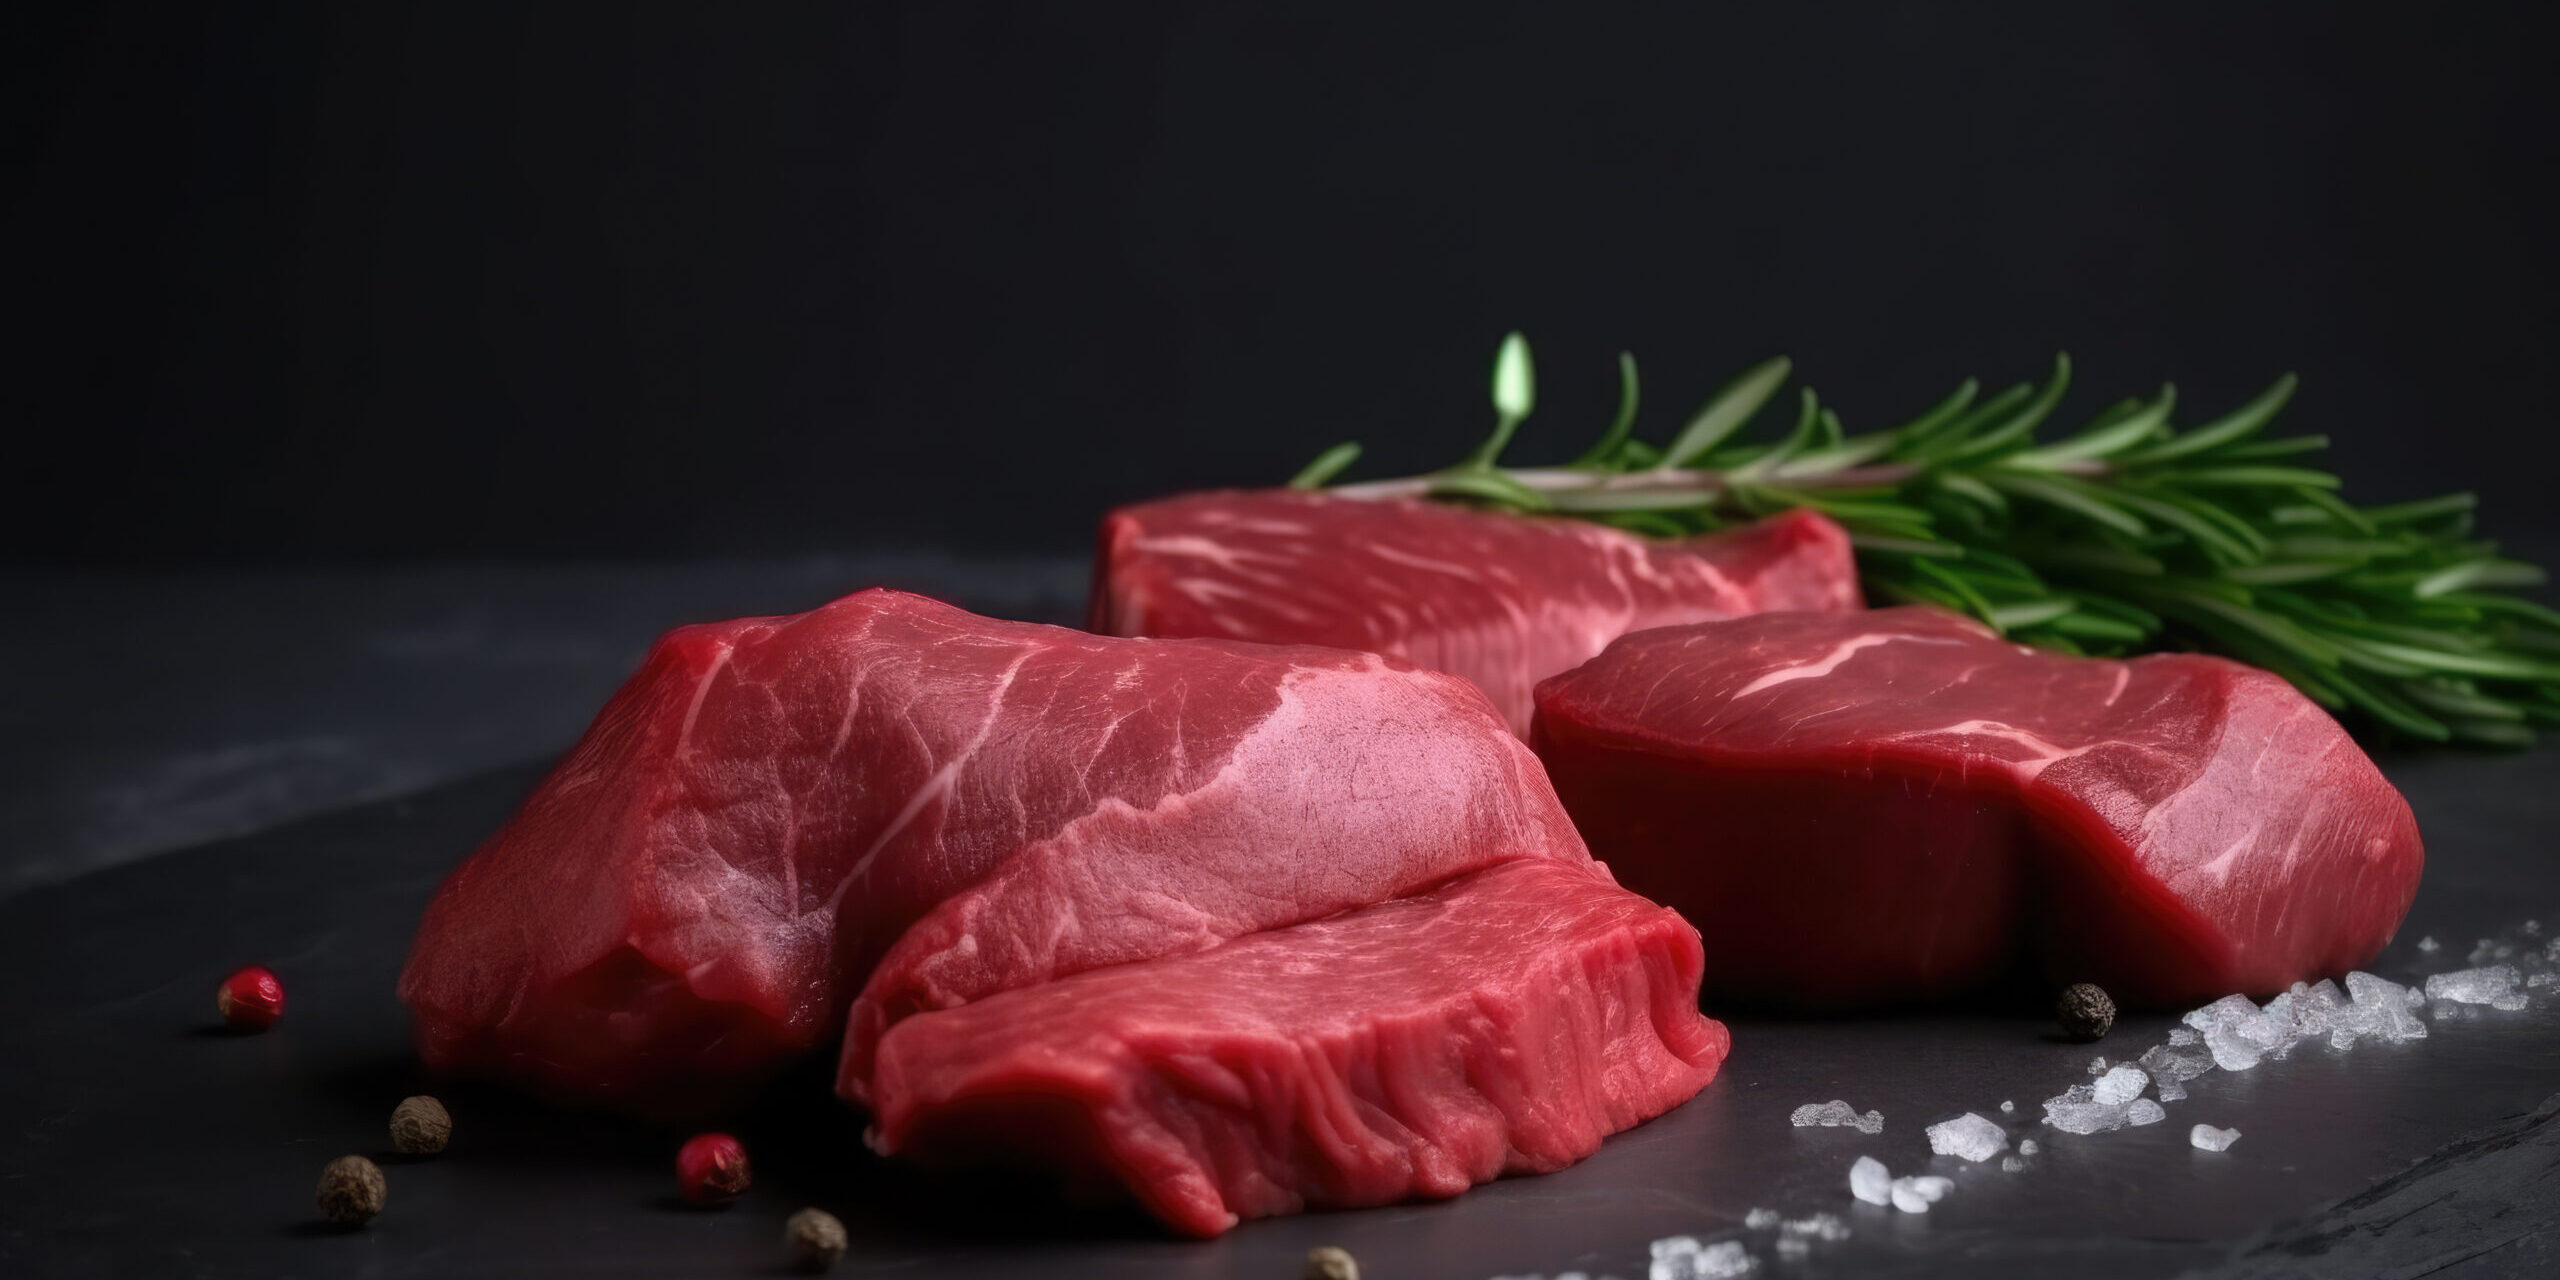 Raw meat steak with herbs and spices on black background.